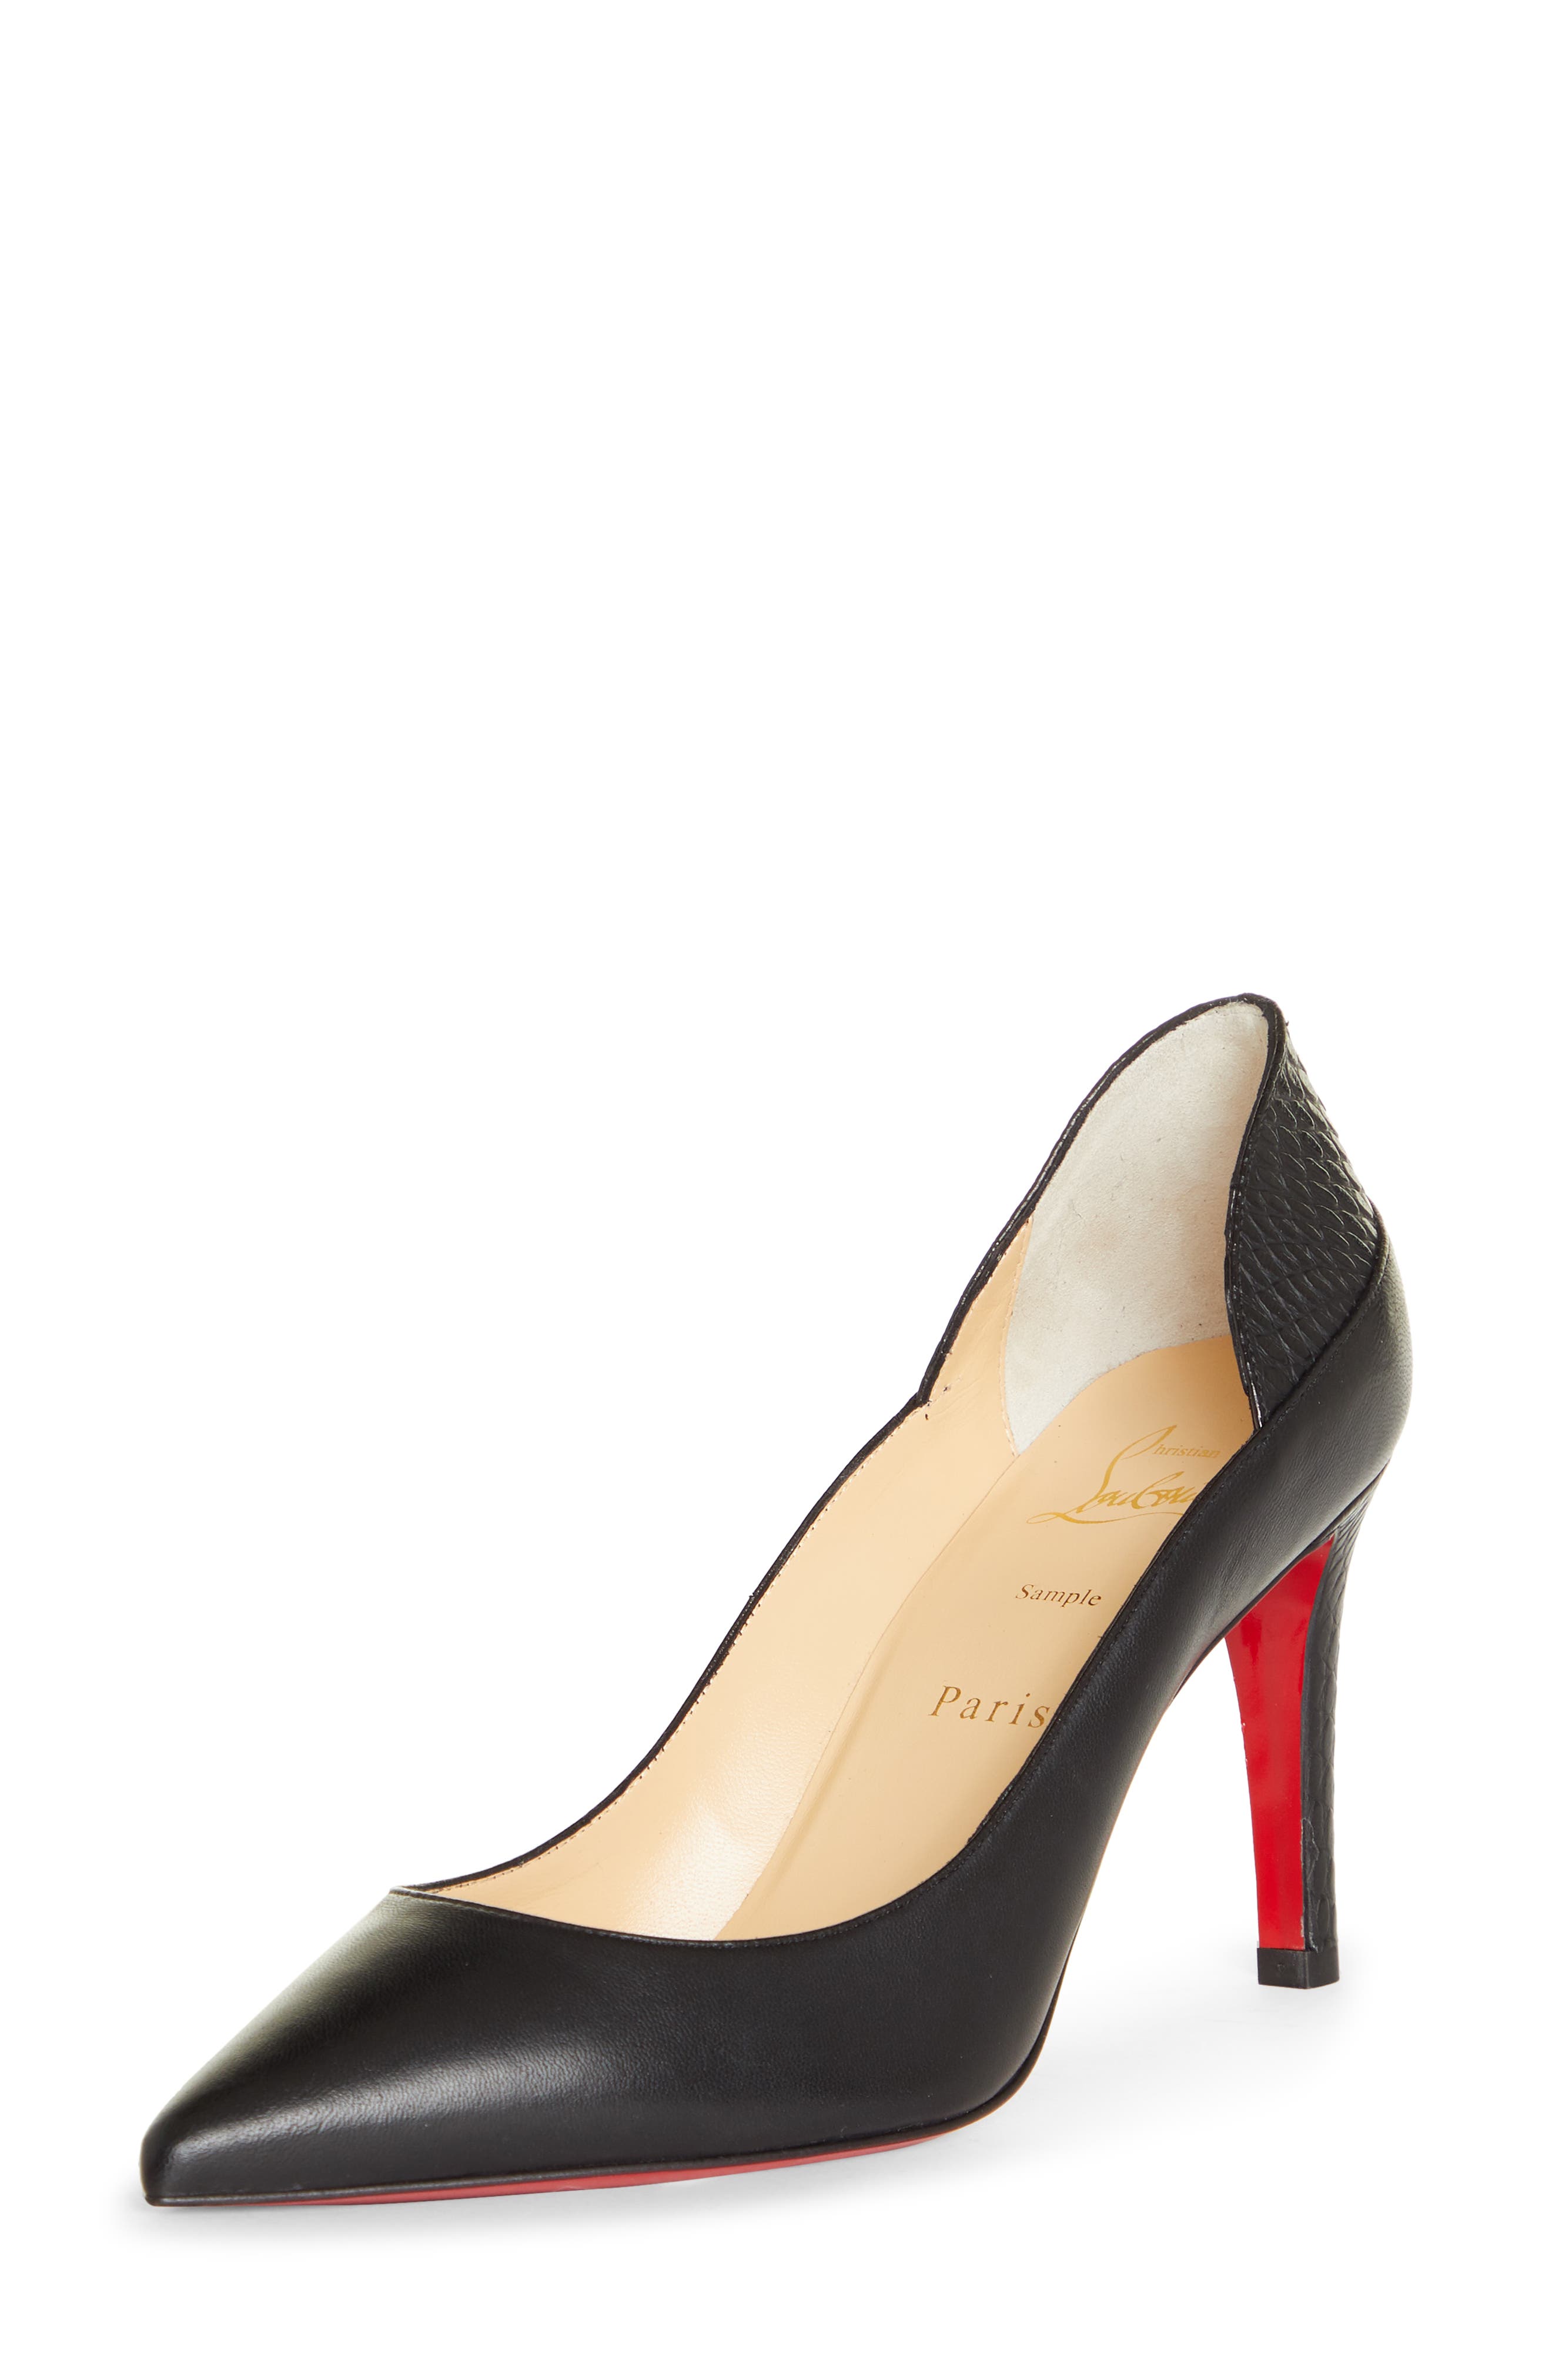 louboutin black shoes red bottom